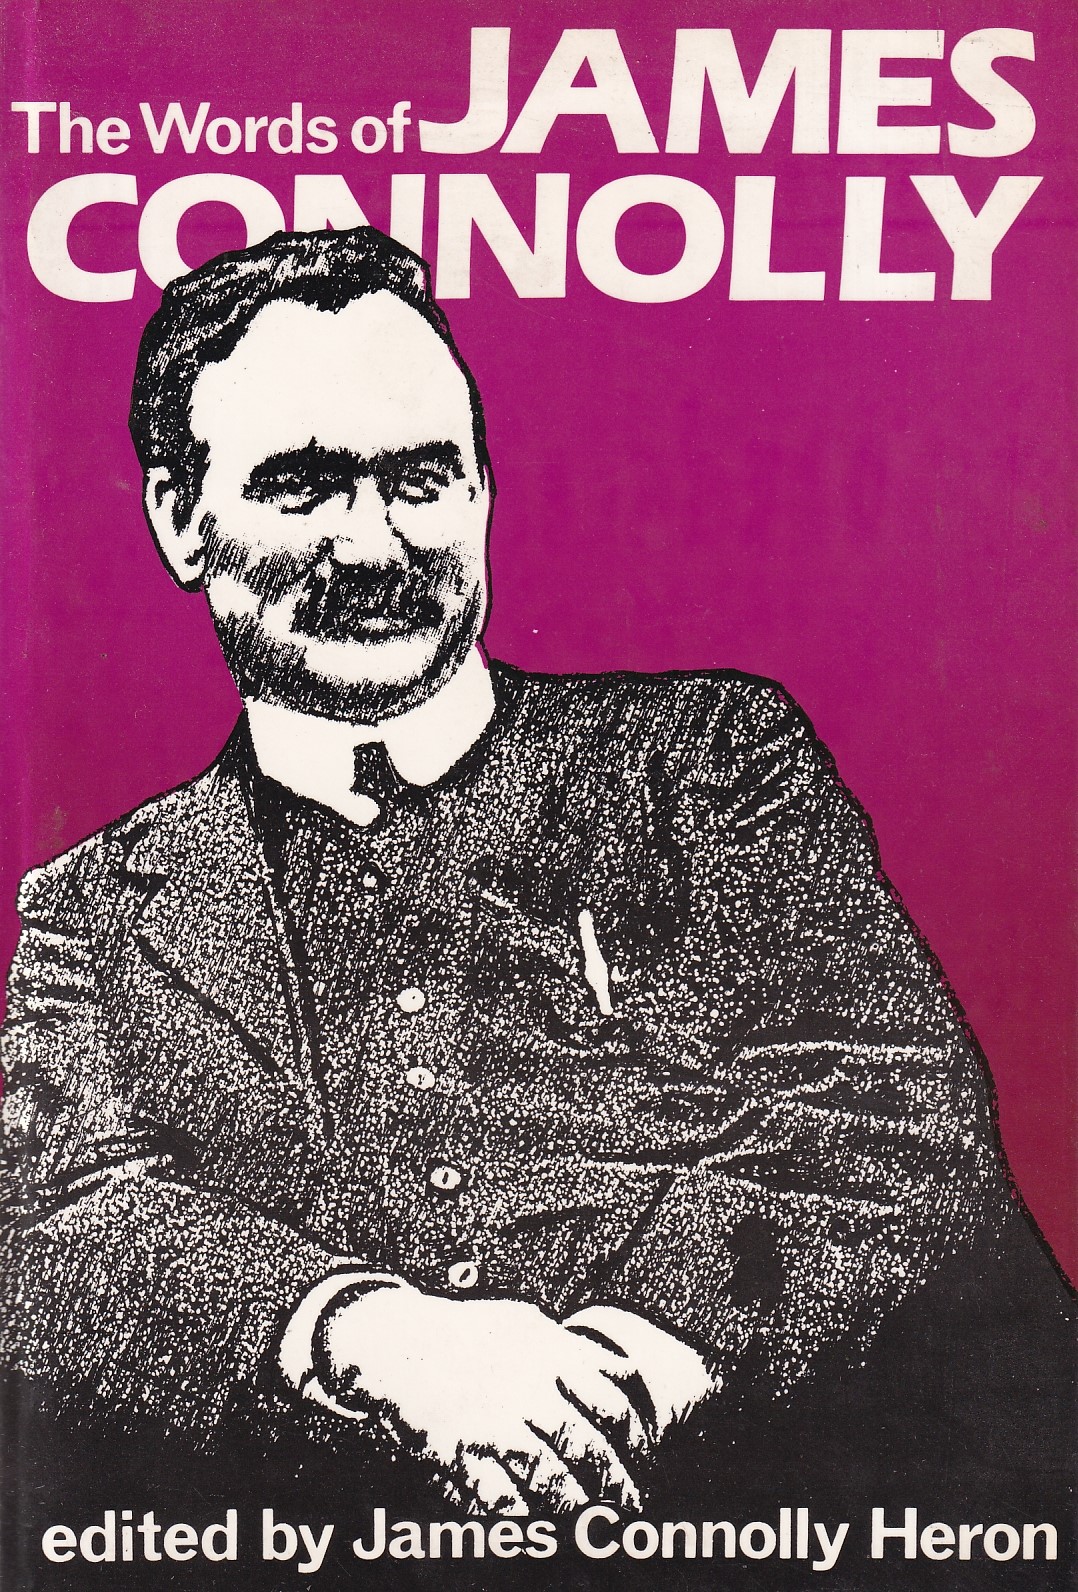 The Words of James Connolly | James Connolly (ed. James Connolly Heron) | Charlie Byrne's